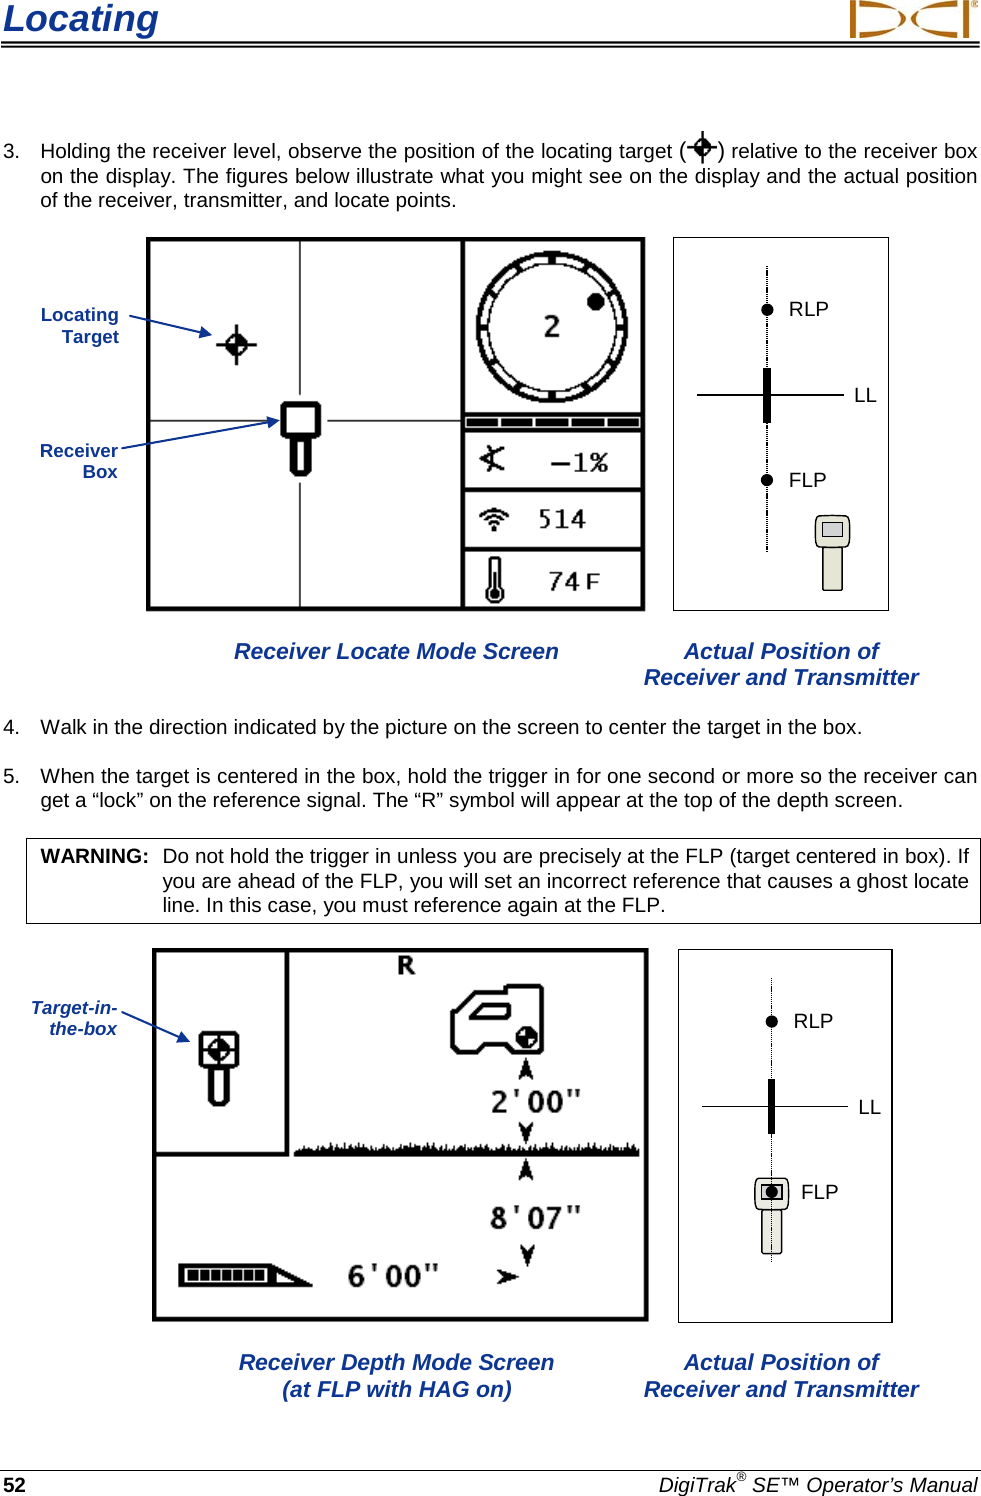 Locating     52 DigiTrak® SE™ Operator’s Manual 3. Holding the receiver level, observe the position of the locating target ( ) relative to the receiver box on the display. The figures below illustrate what you might see on the display and the actual position of the receiver, transmitter, and locate points.    RLPFLPLL  Receiver Locate Mode Screen Actual Position of        Receiver and Transmitter 4. Walk in the direction indicated by the picture on the screen to center the target in the box. 5. When the target is centered in the box, hold the trigger in for one second or more so the receiver can get a “lock” on the reference signal. The “R” symbol will appear at the top of the depth screen.  WARNING: Do not hold the trigger in unless you are precisely at the FLP (target centered in box). If you are ahead of the FLP, you will set an incorrect reference that causes a ghost locate line. In this case, you must reference again at the FLP.      RLPFLPLL  Receiver Depth Mode Screen Actual Position of     (at FLP with HAG on) Receiver and Transmitter Locating Target Receiver Box Target-in-the-box  